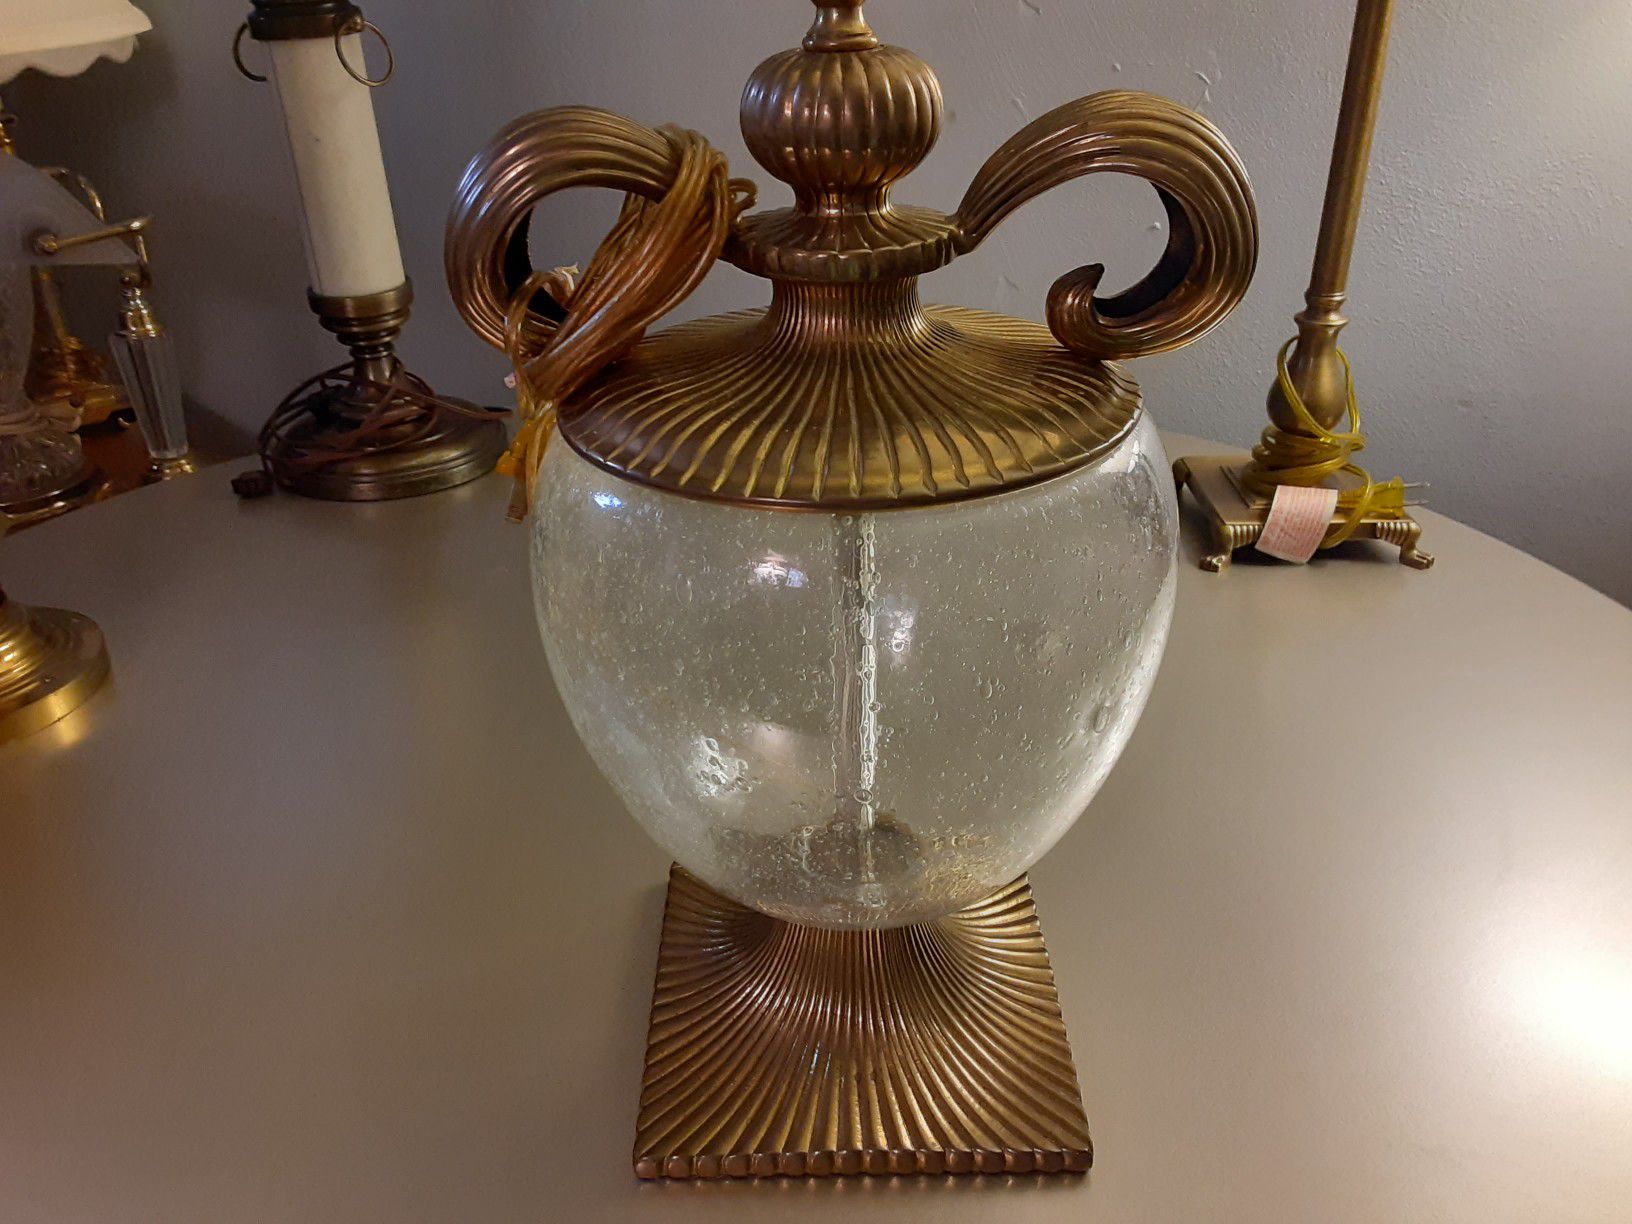 VERY UNIQUE LOOKING VINTAGE Heavy BRASS and Glass LAMP